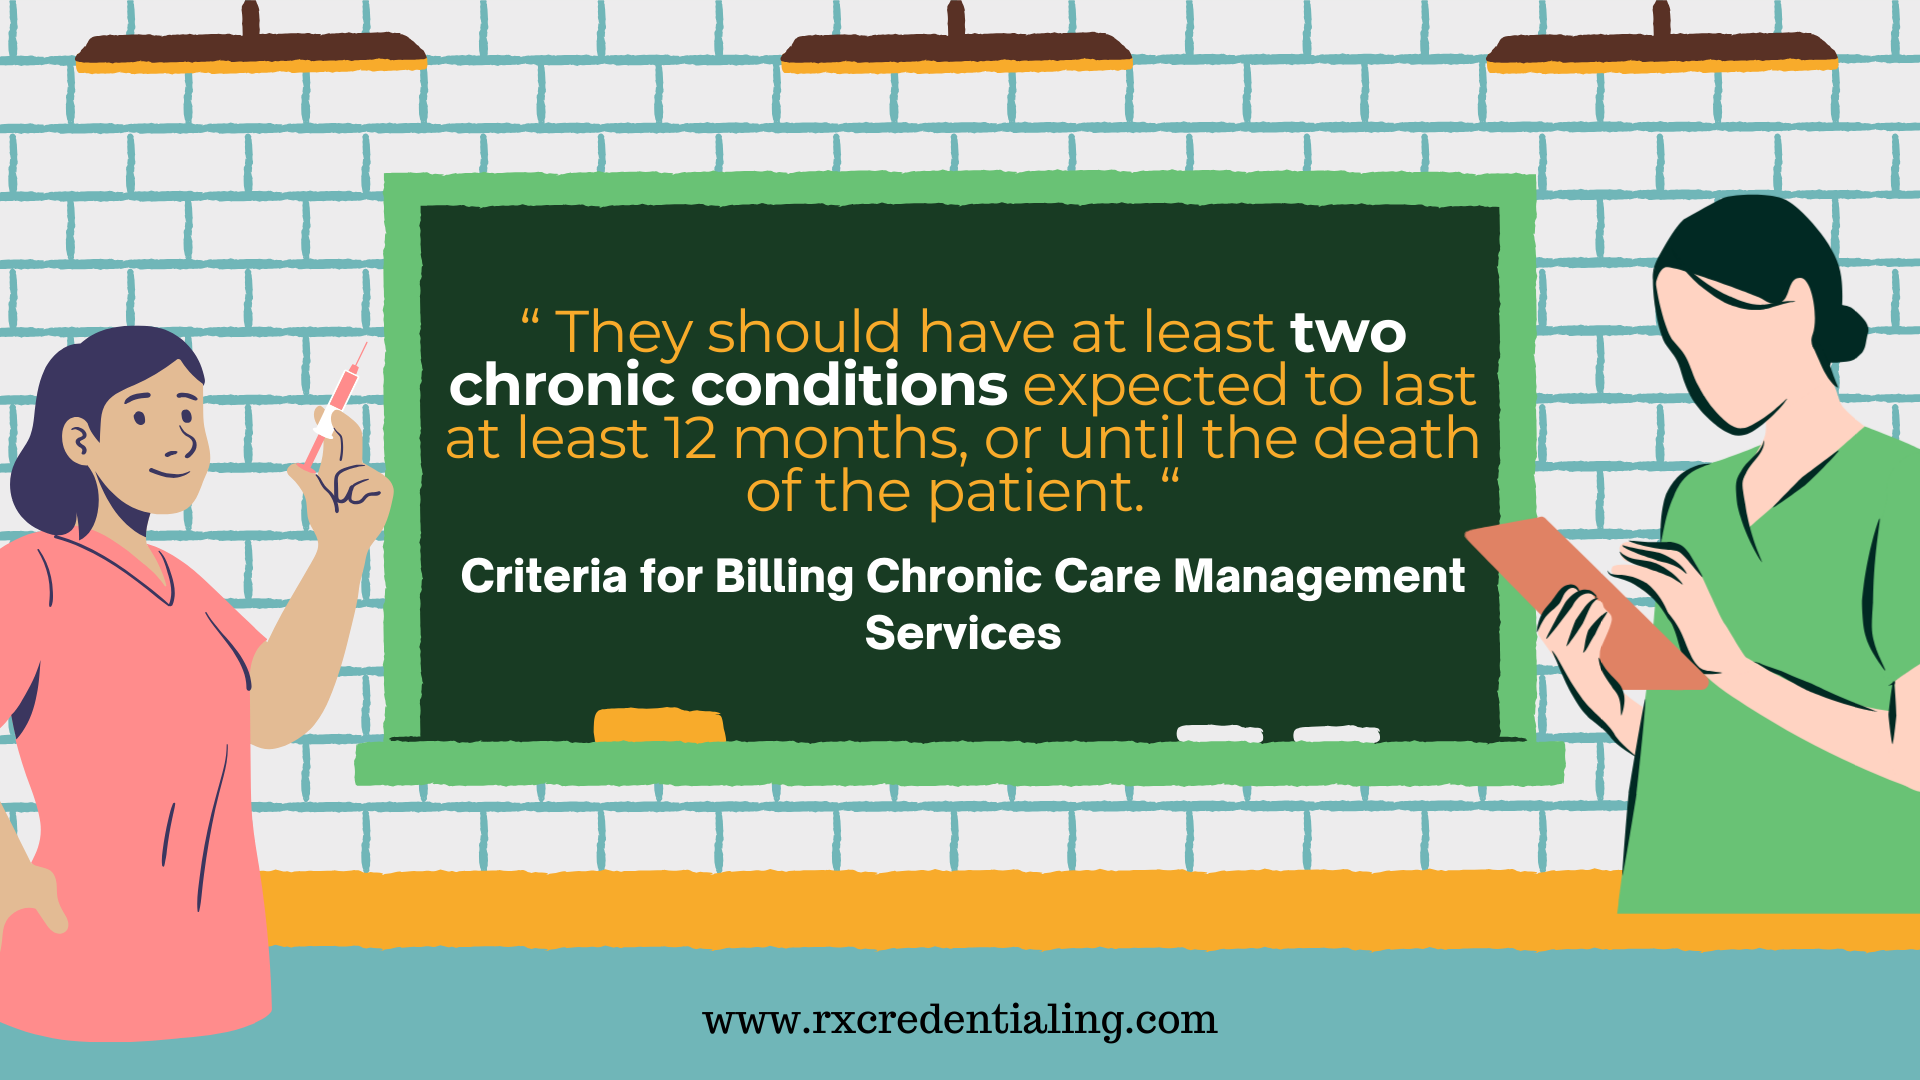 Criteria for Billing Chronic Care Management Services